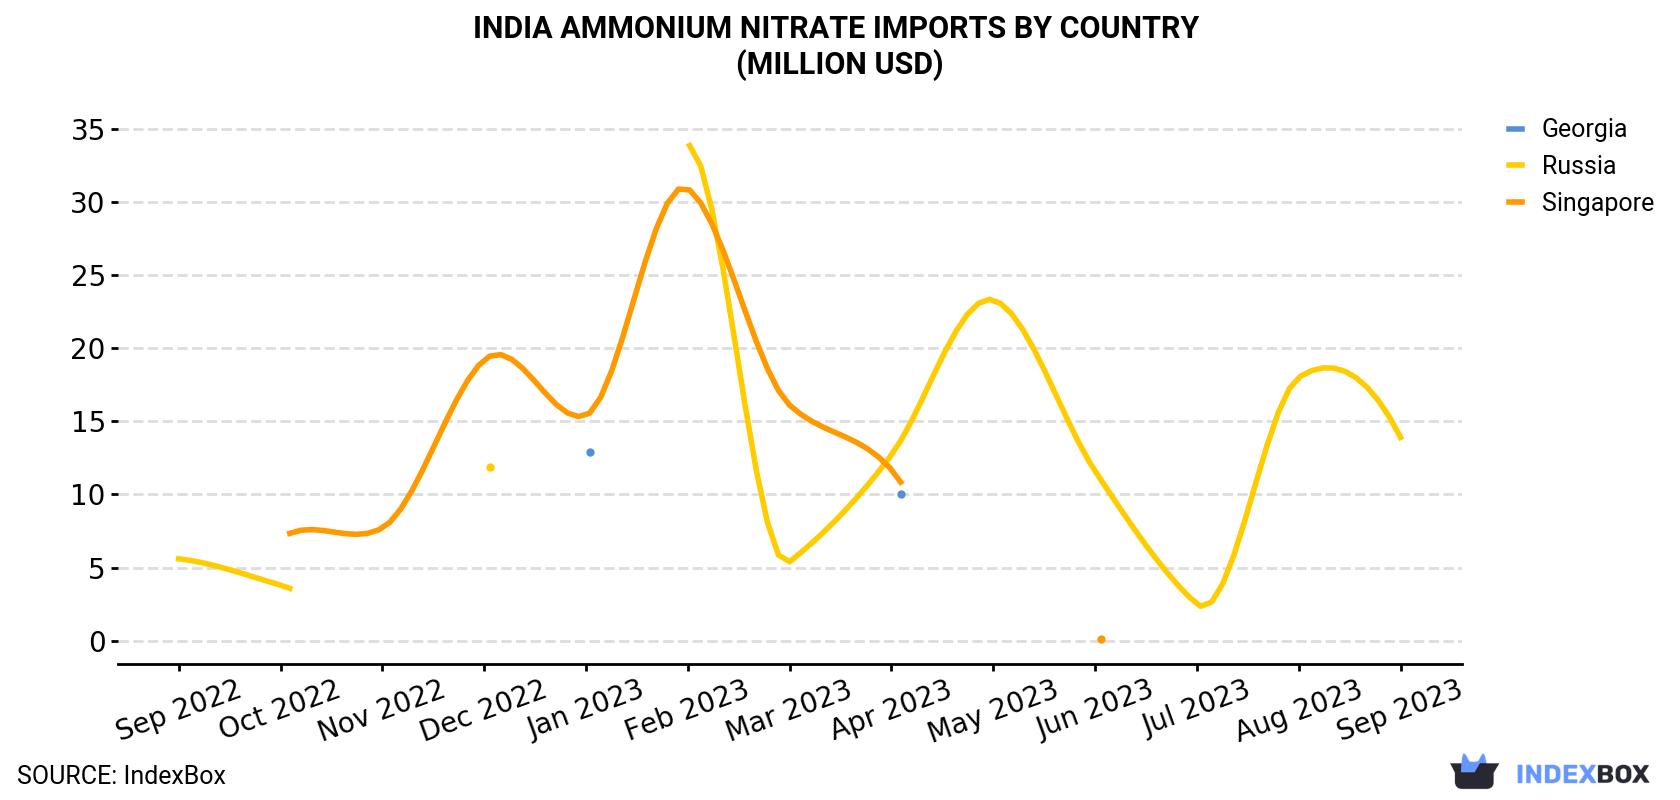 India Ammonium Nitrate Imports By Country (Million USD)